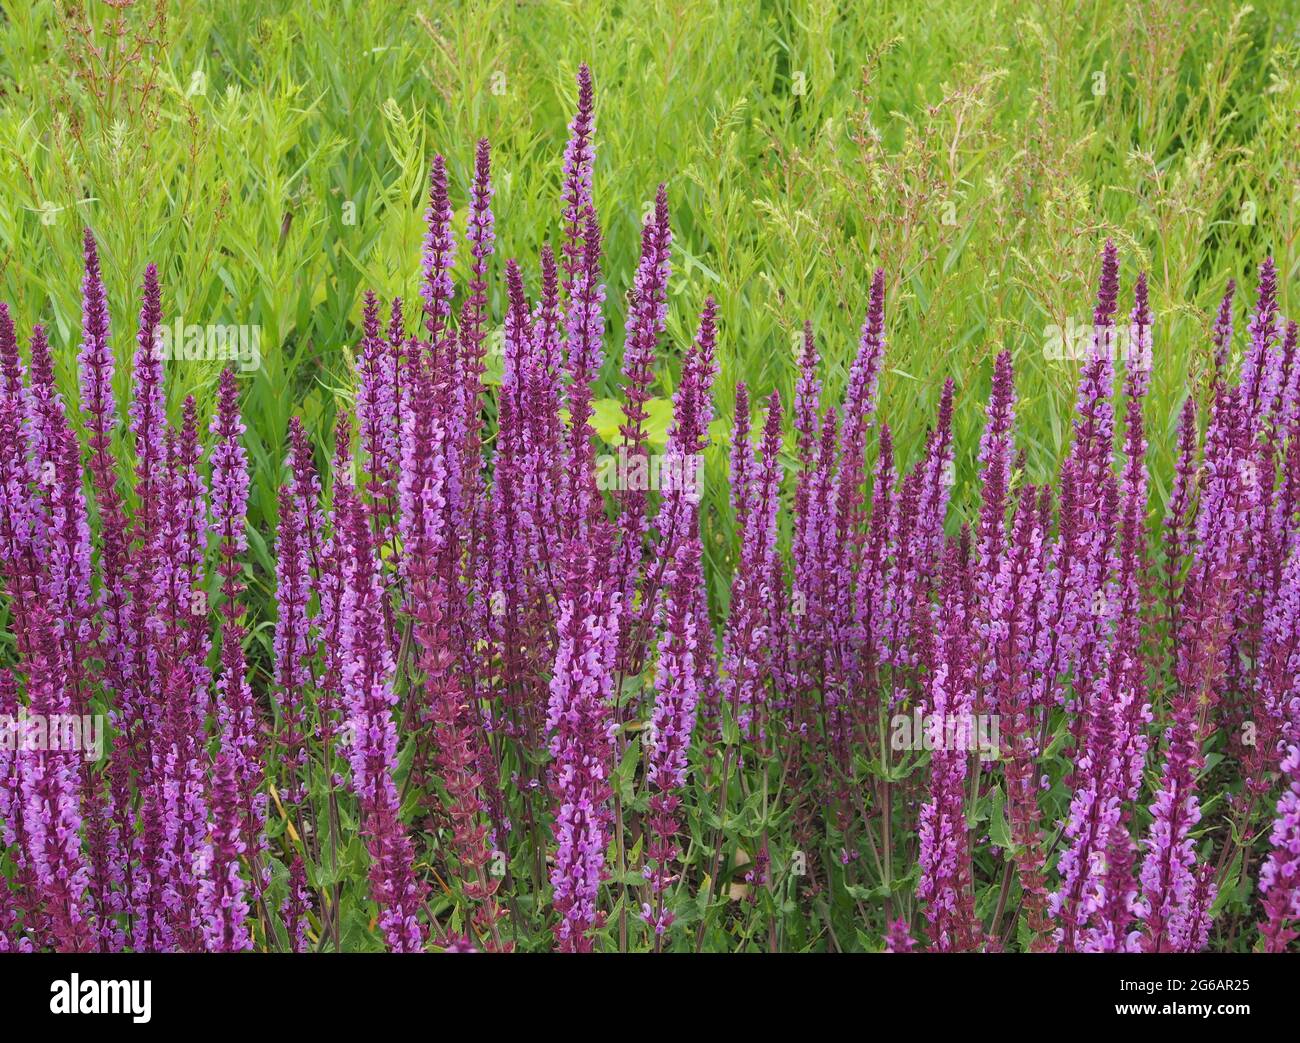 A clump of Salvia Nemorosa Amethyst - common name Balkan Clary in full flower in July. Stock Photo